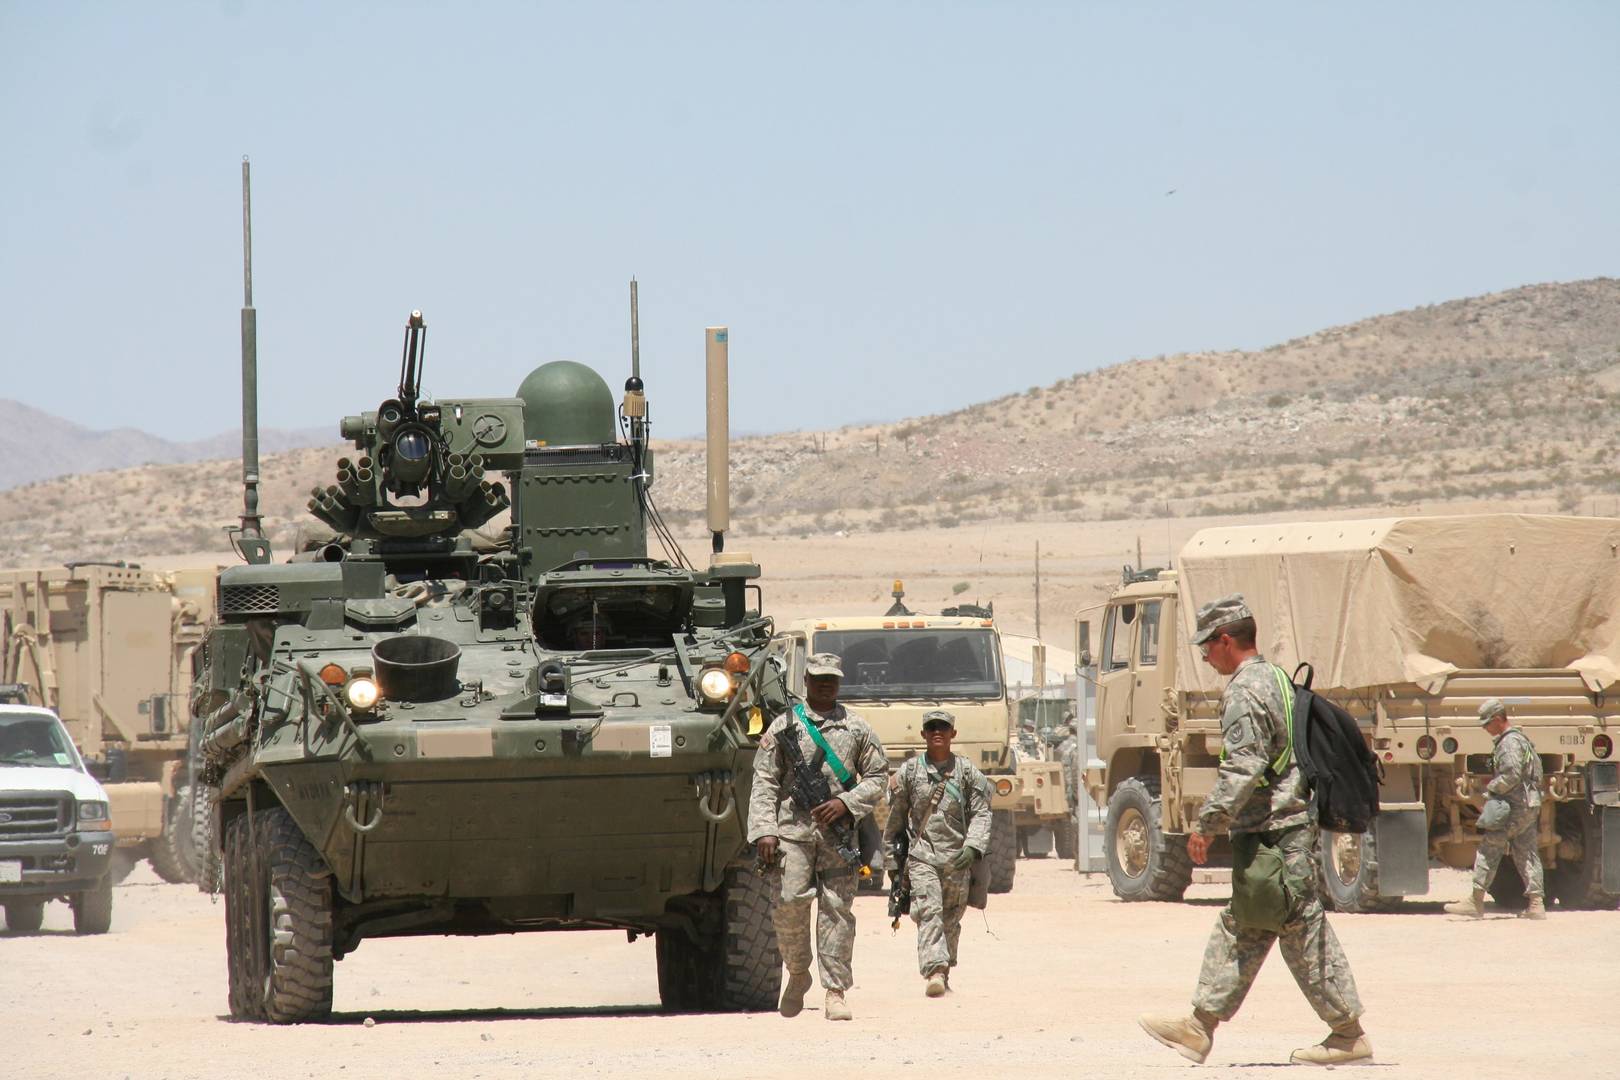 Warfighter Information Network-Tactical (WIN-T) Increment 2 integrated onto Stryker vehicles,